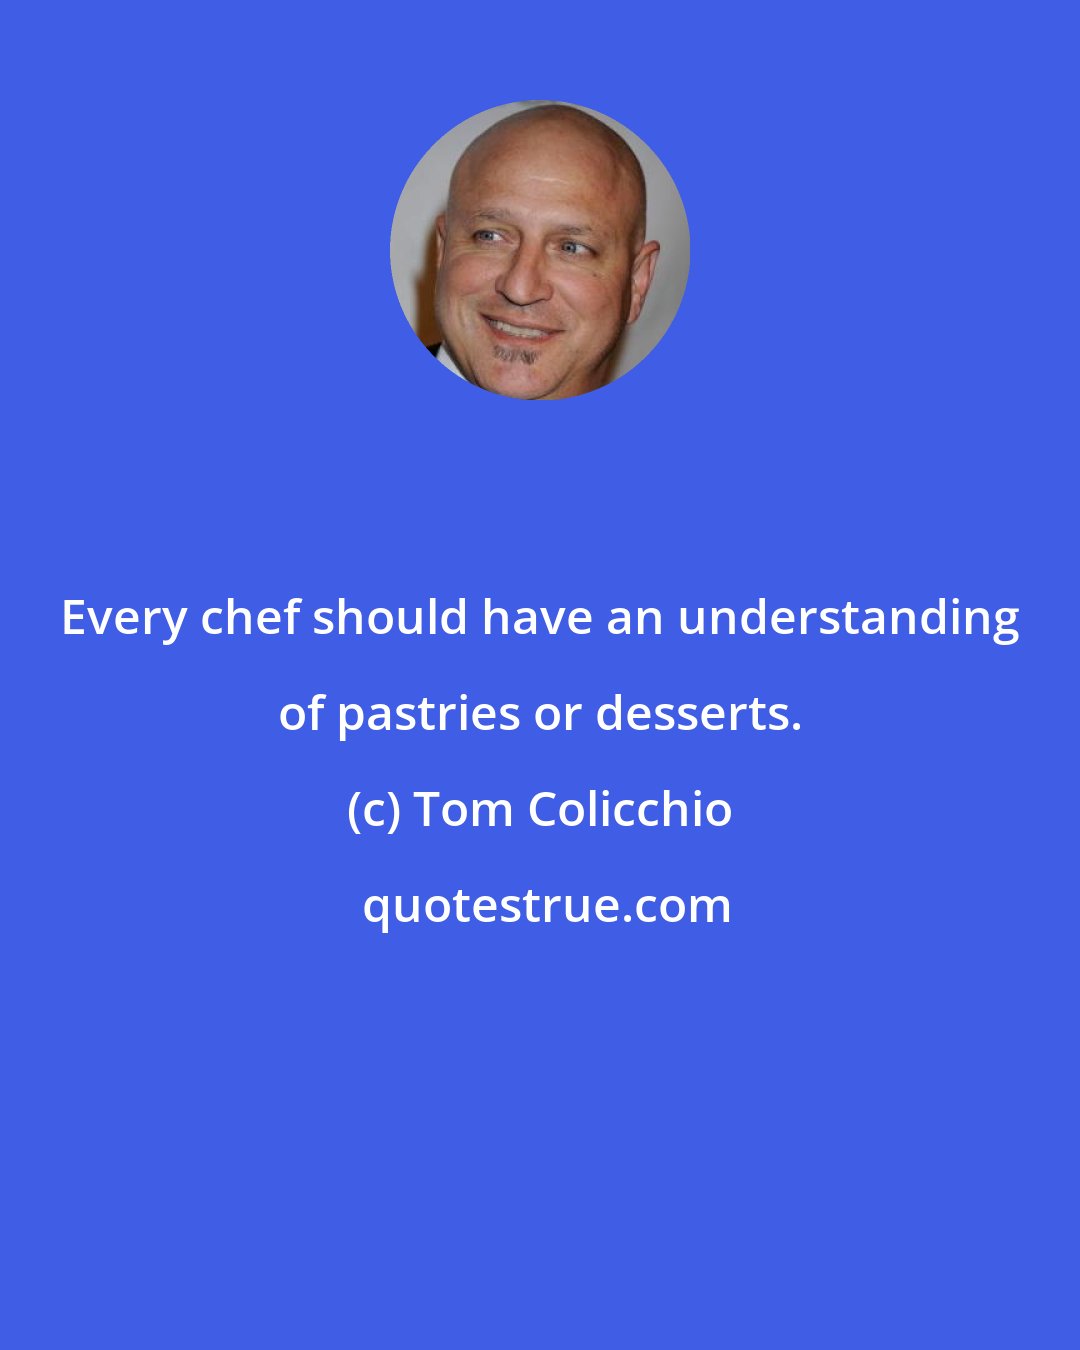 Tom Colicchio: Every chef should have an understanding of pastries or desserts.